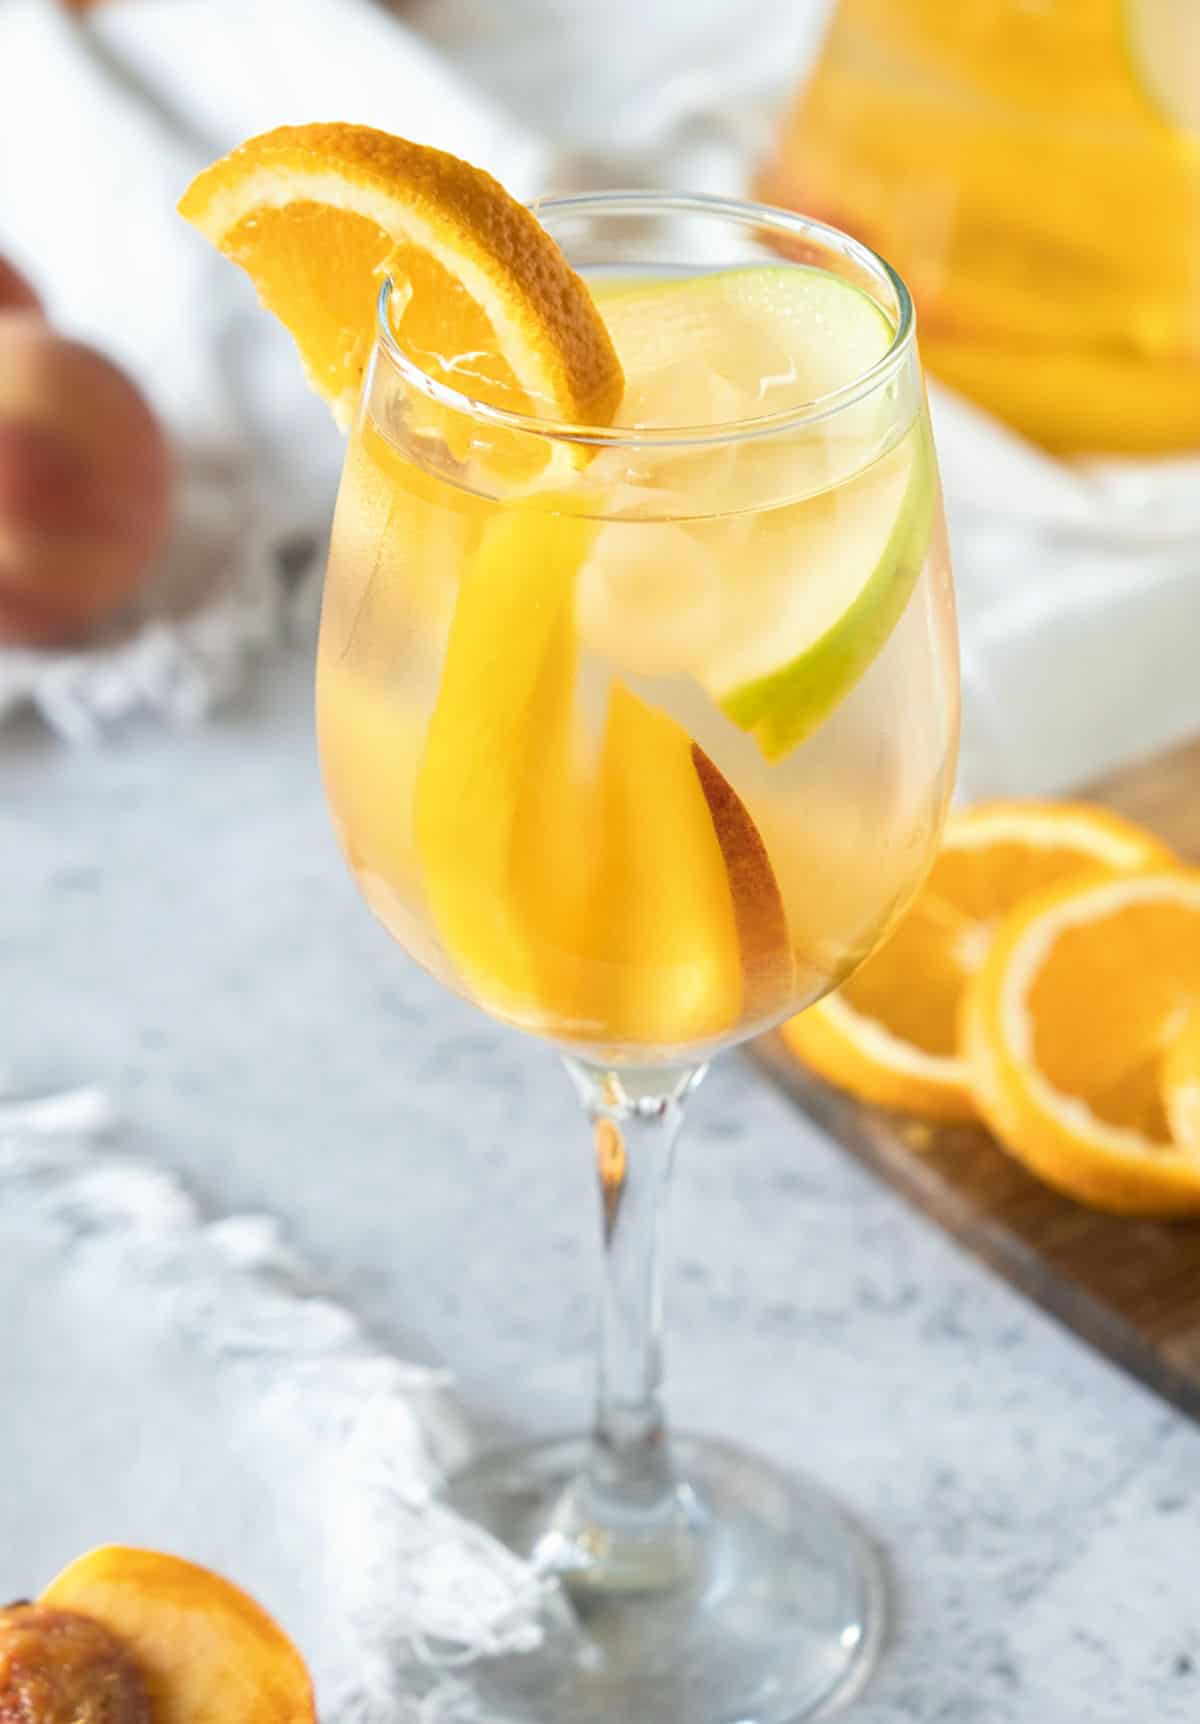 Stem glass with white wine sangria with orange and apple slices. Grey surface with more fruit. 